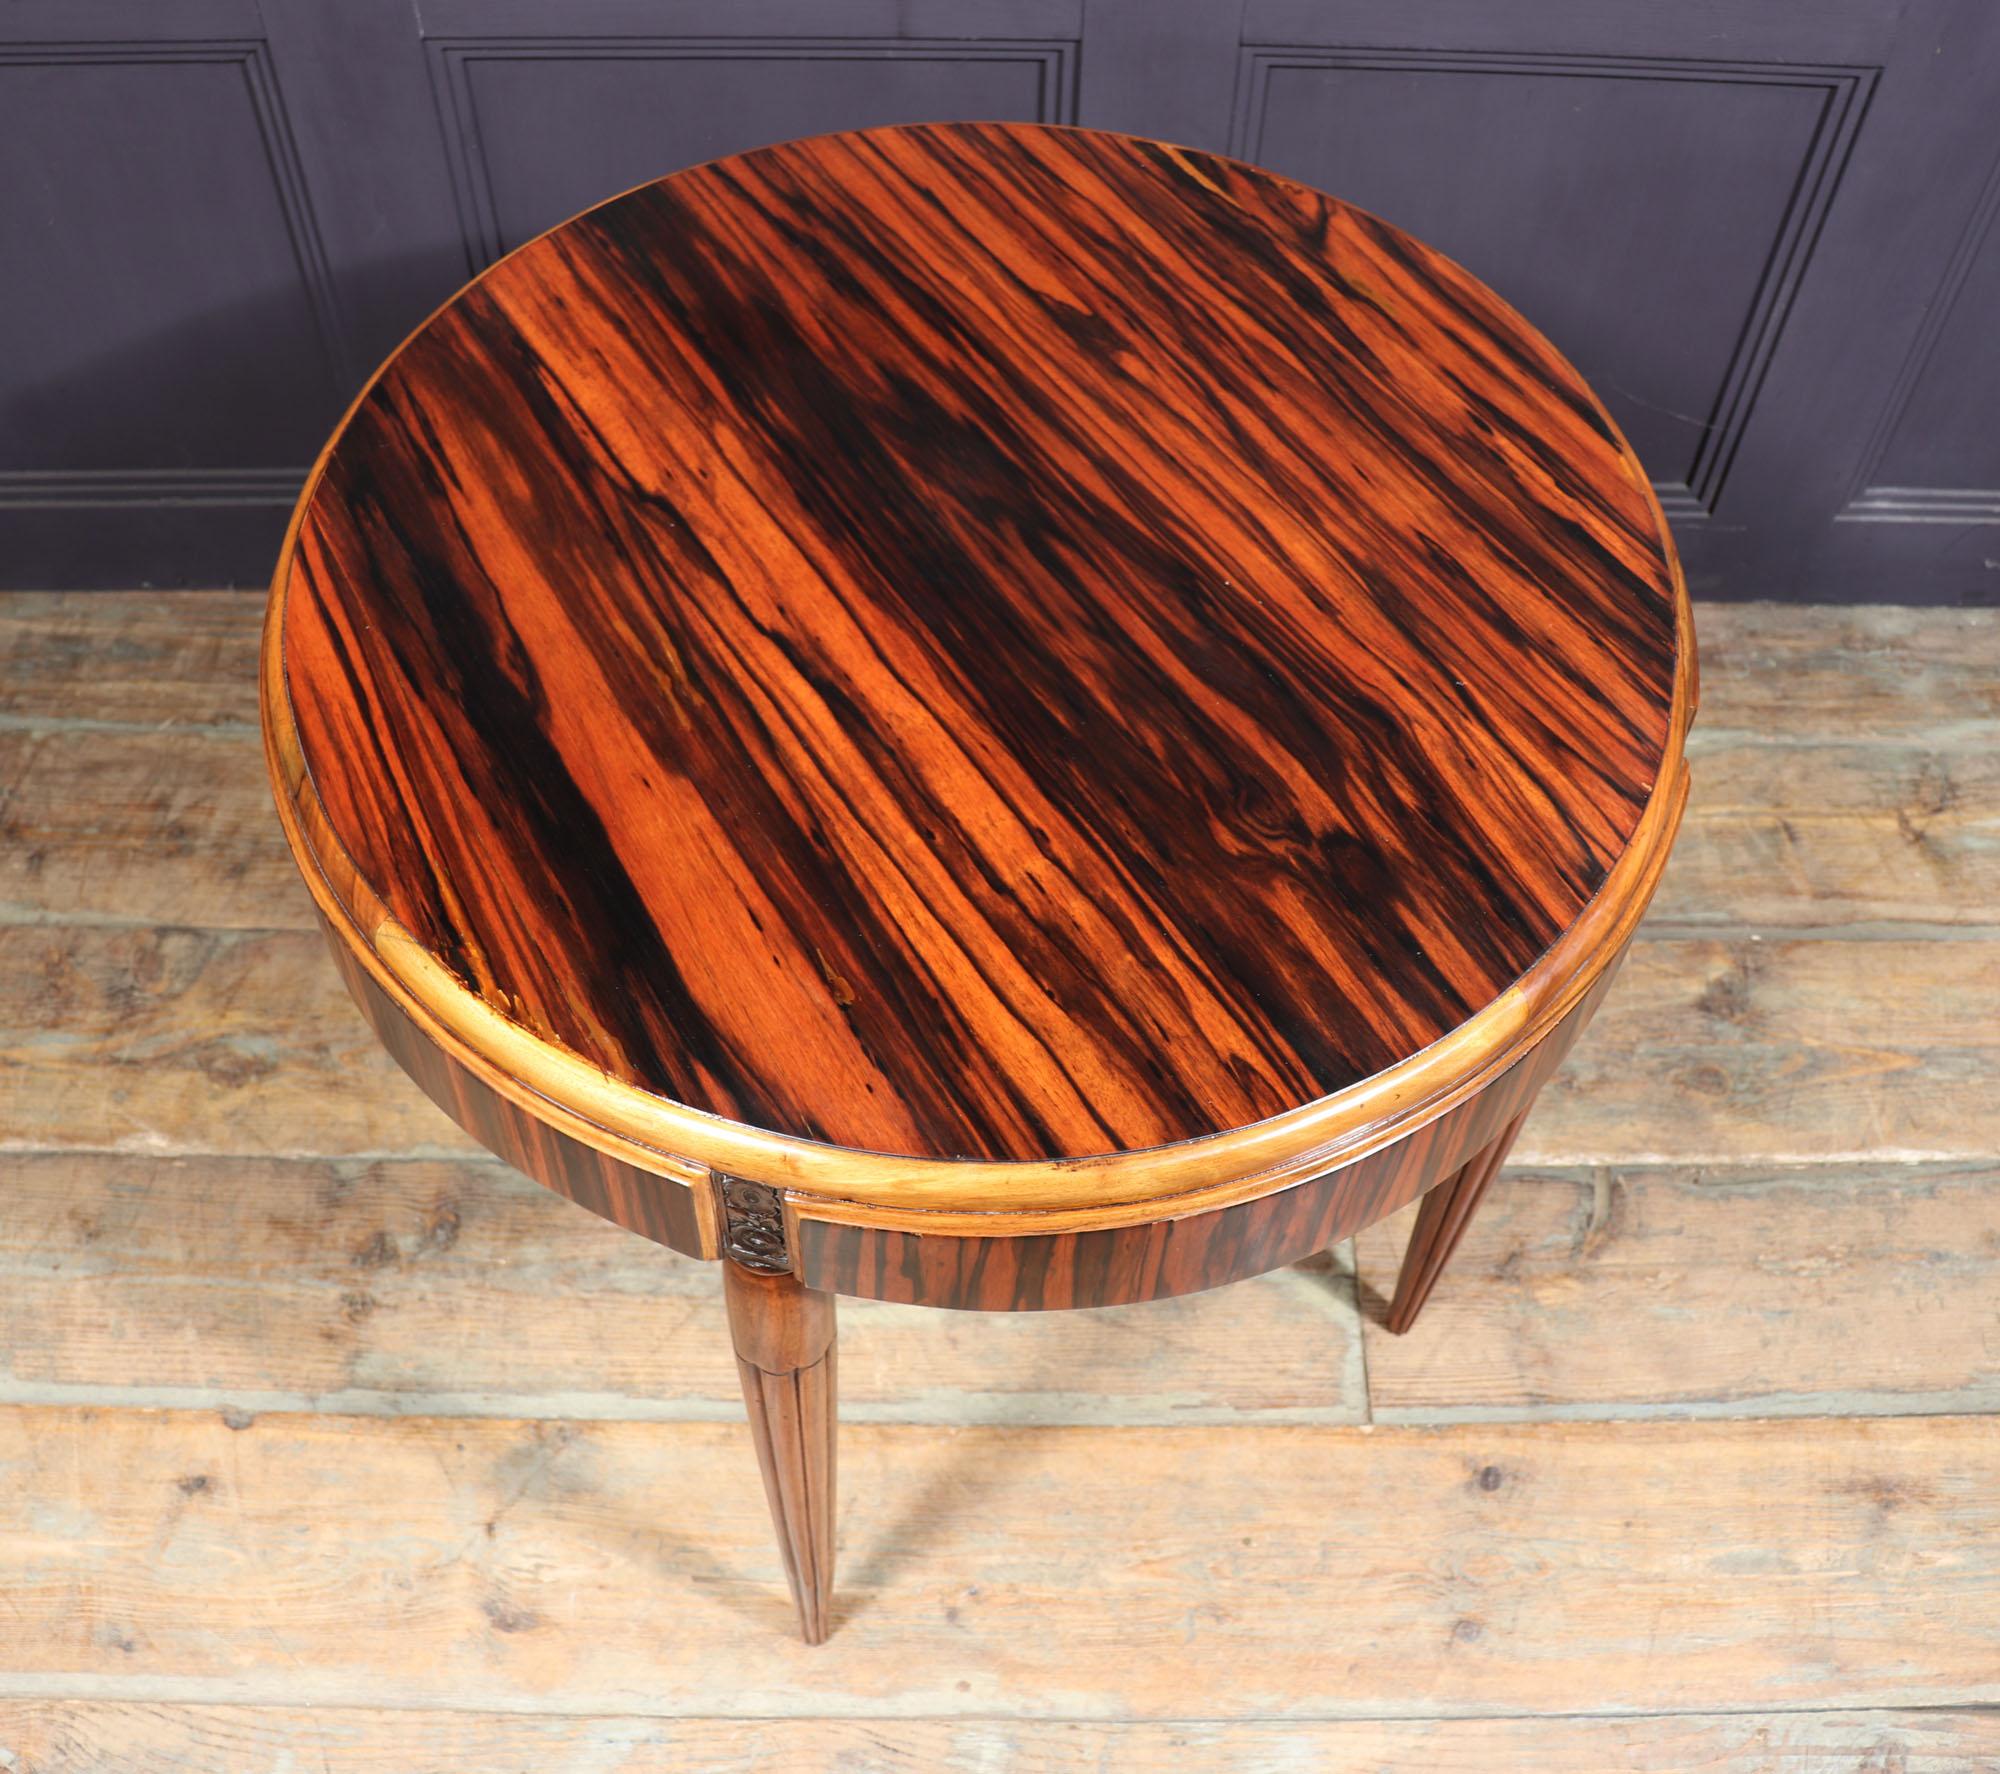 French Art Deco Table in Macassar ebony and Walnut For Sale 2